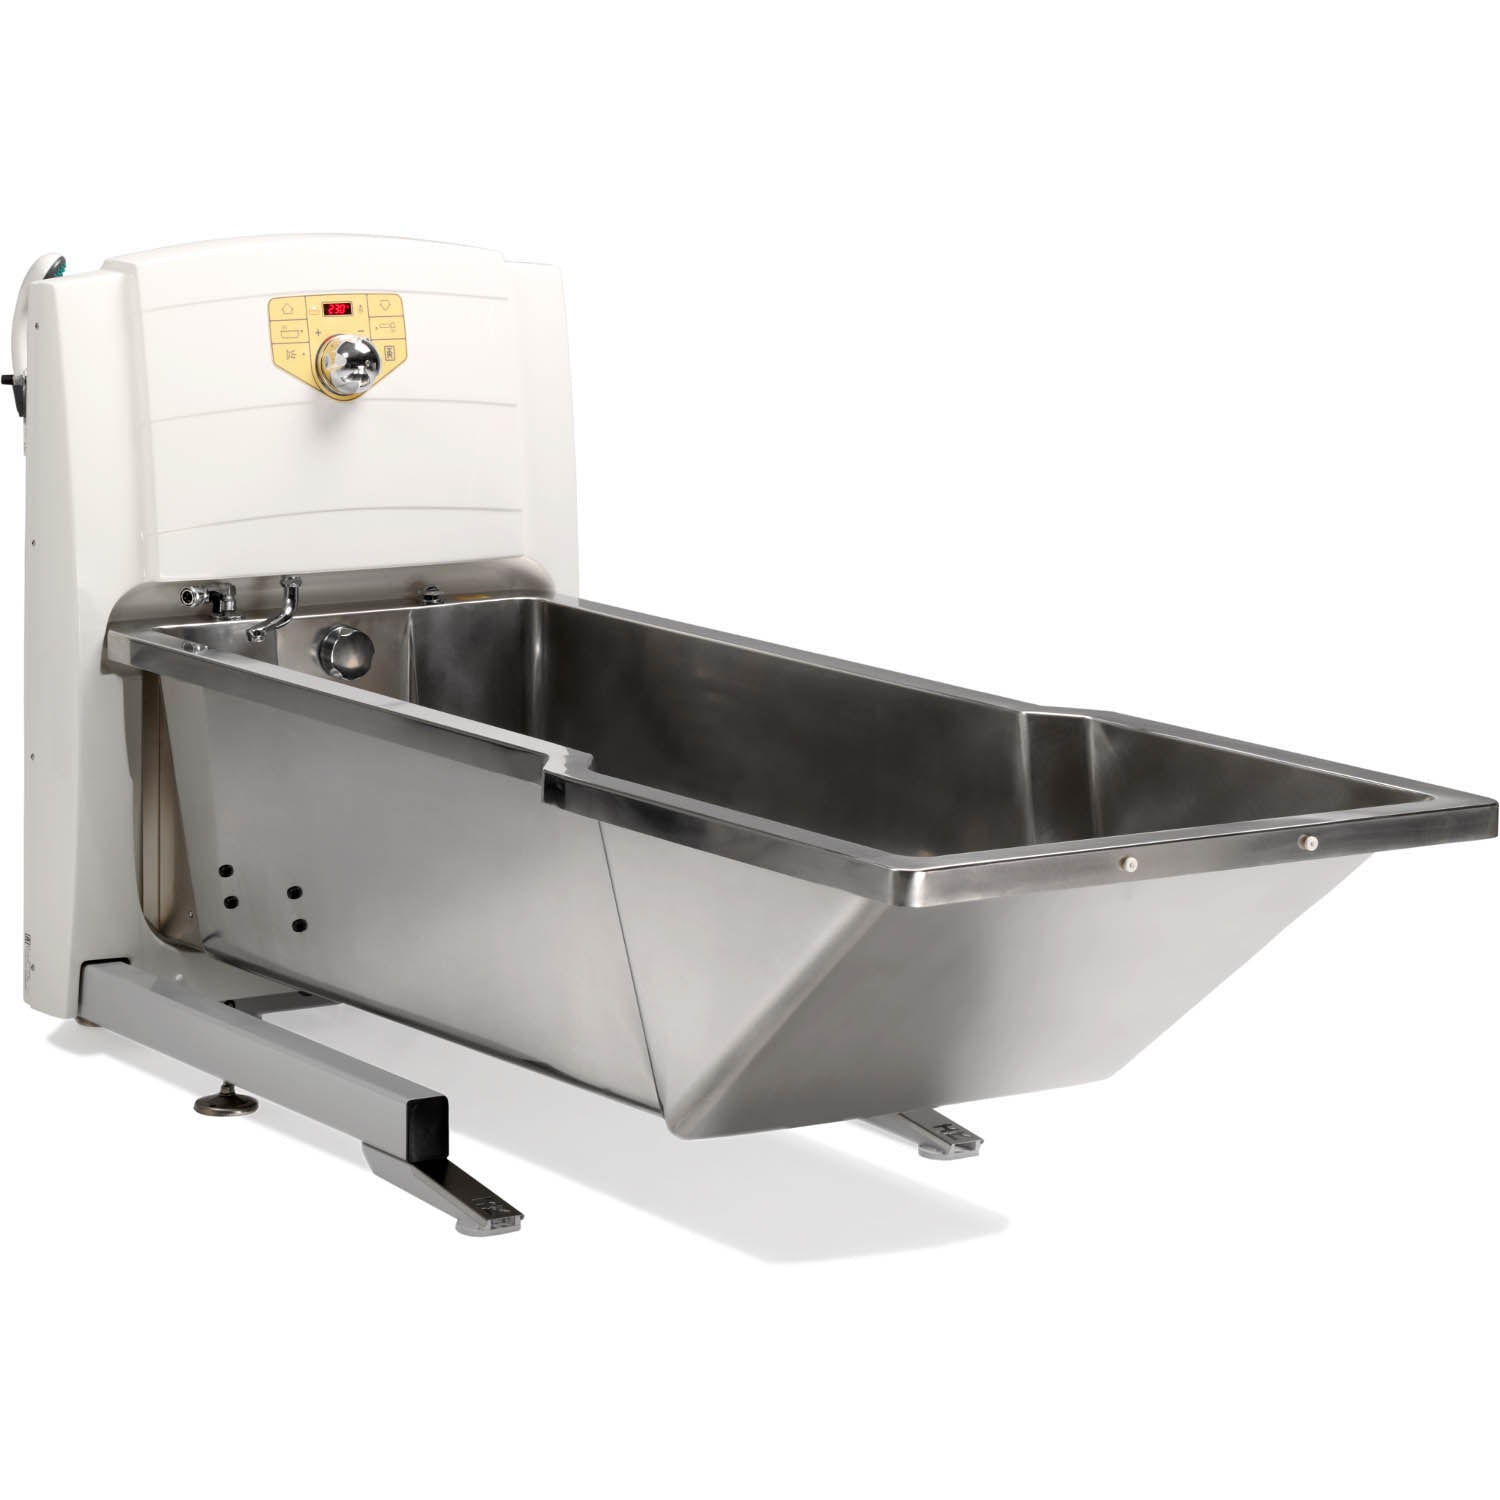 TR Equipment TR 900-CWSS Electric Height Adjustable Bathtub- Stainless Steel Tub